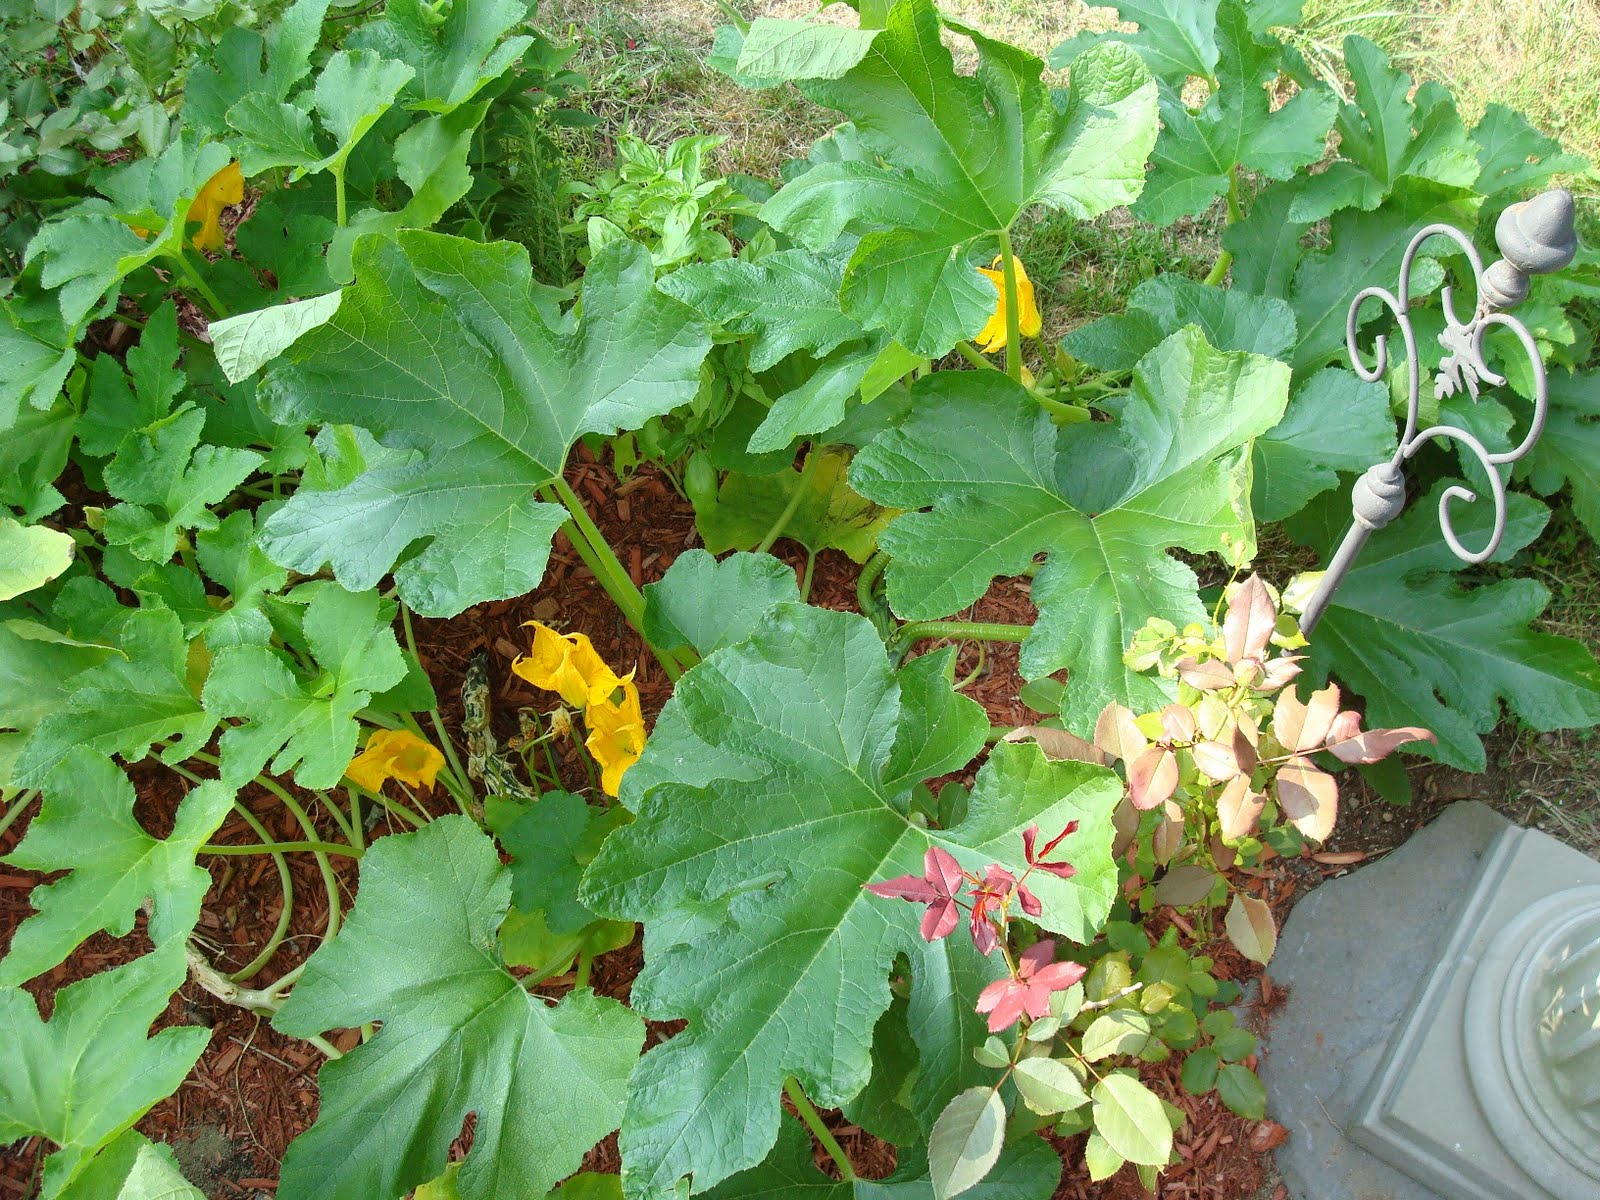 Plantation By The Sea: Emerging Acorn Squash and Pole Beans